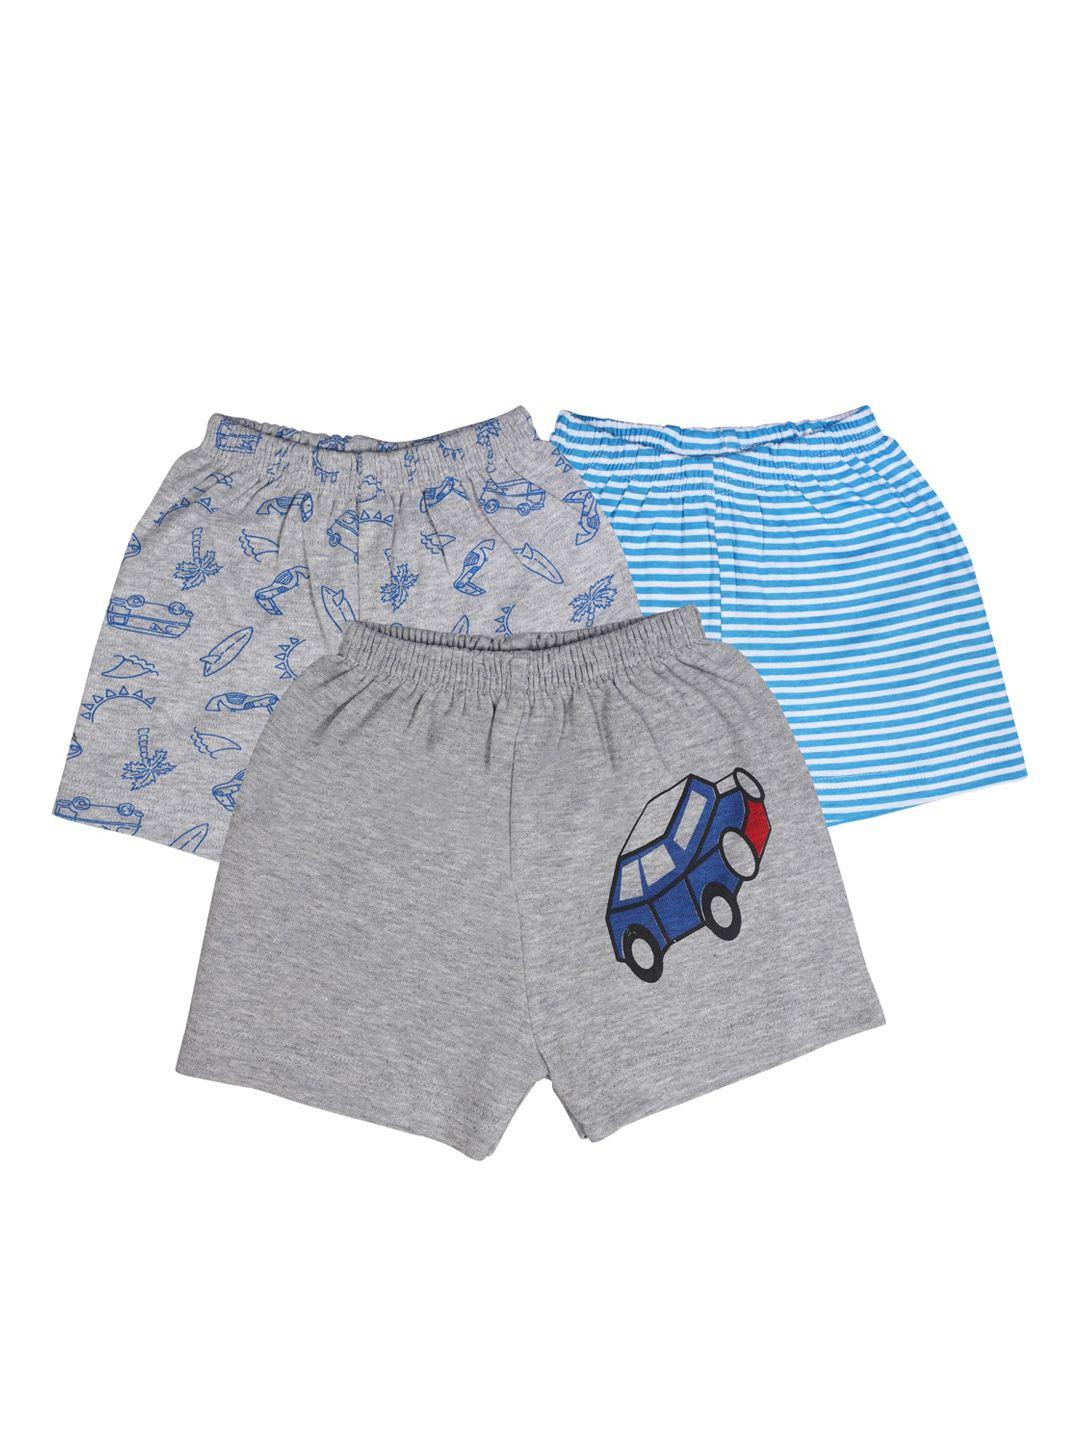 rikidoos boys pack of 3 striped shorts